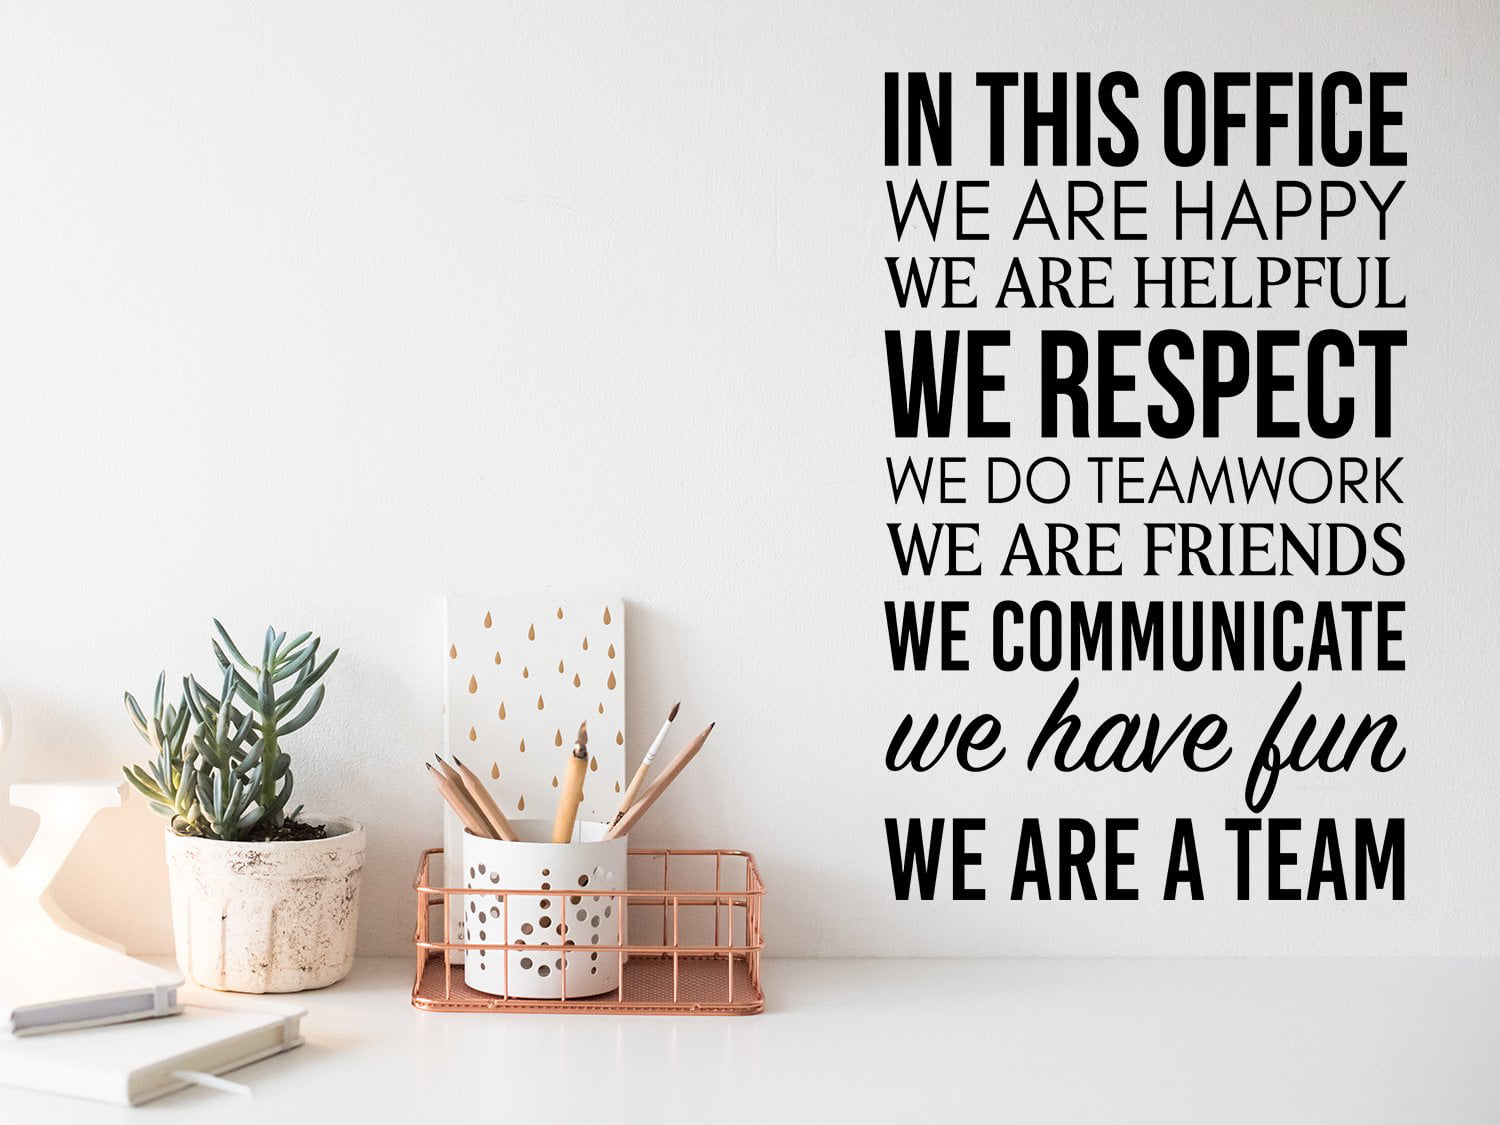 Office Rule "WE ARE A TEAM" Removable Wall Quote Stickers Vinyl Decal Decor Art 